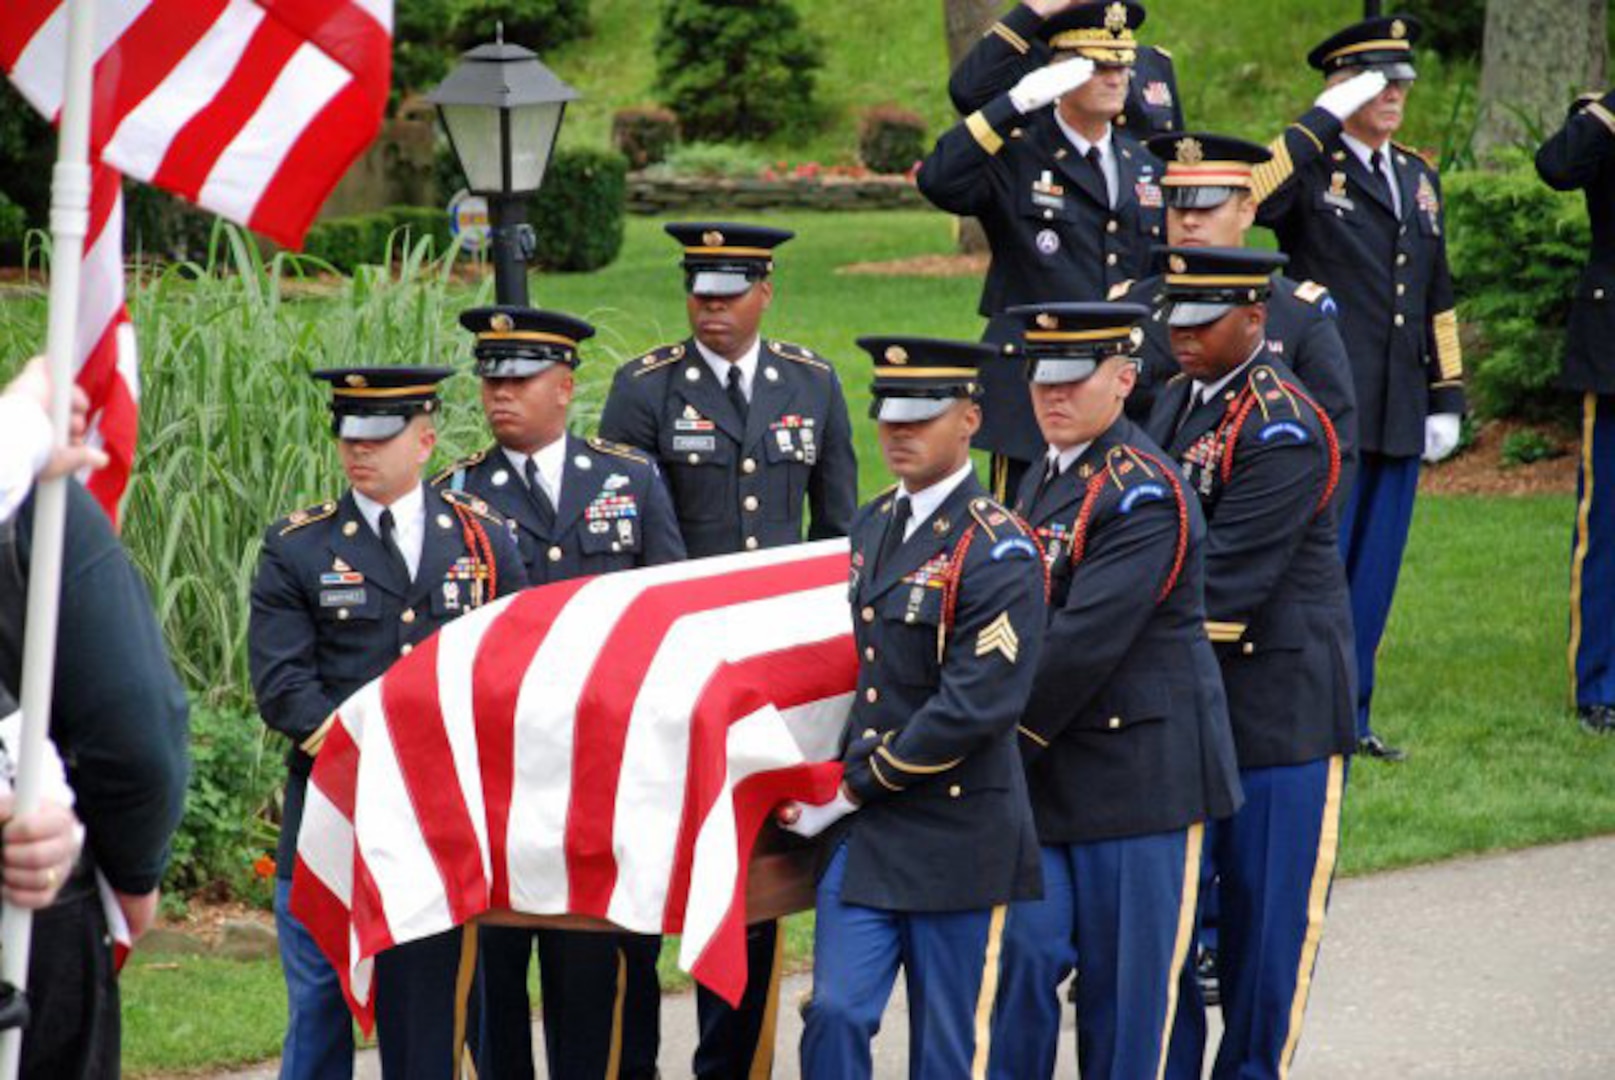 The flag-covered casket of New York Army National Guard 1st Lt. Joseph Theinert, is carried by members of the New York Military Forces Honor Guard on June, 11, 2010. The New York Military Forces Honor Guard expects to perform more than 10,600 military funerals, mostly for World War II veterans, in 2011.